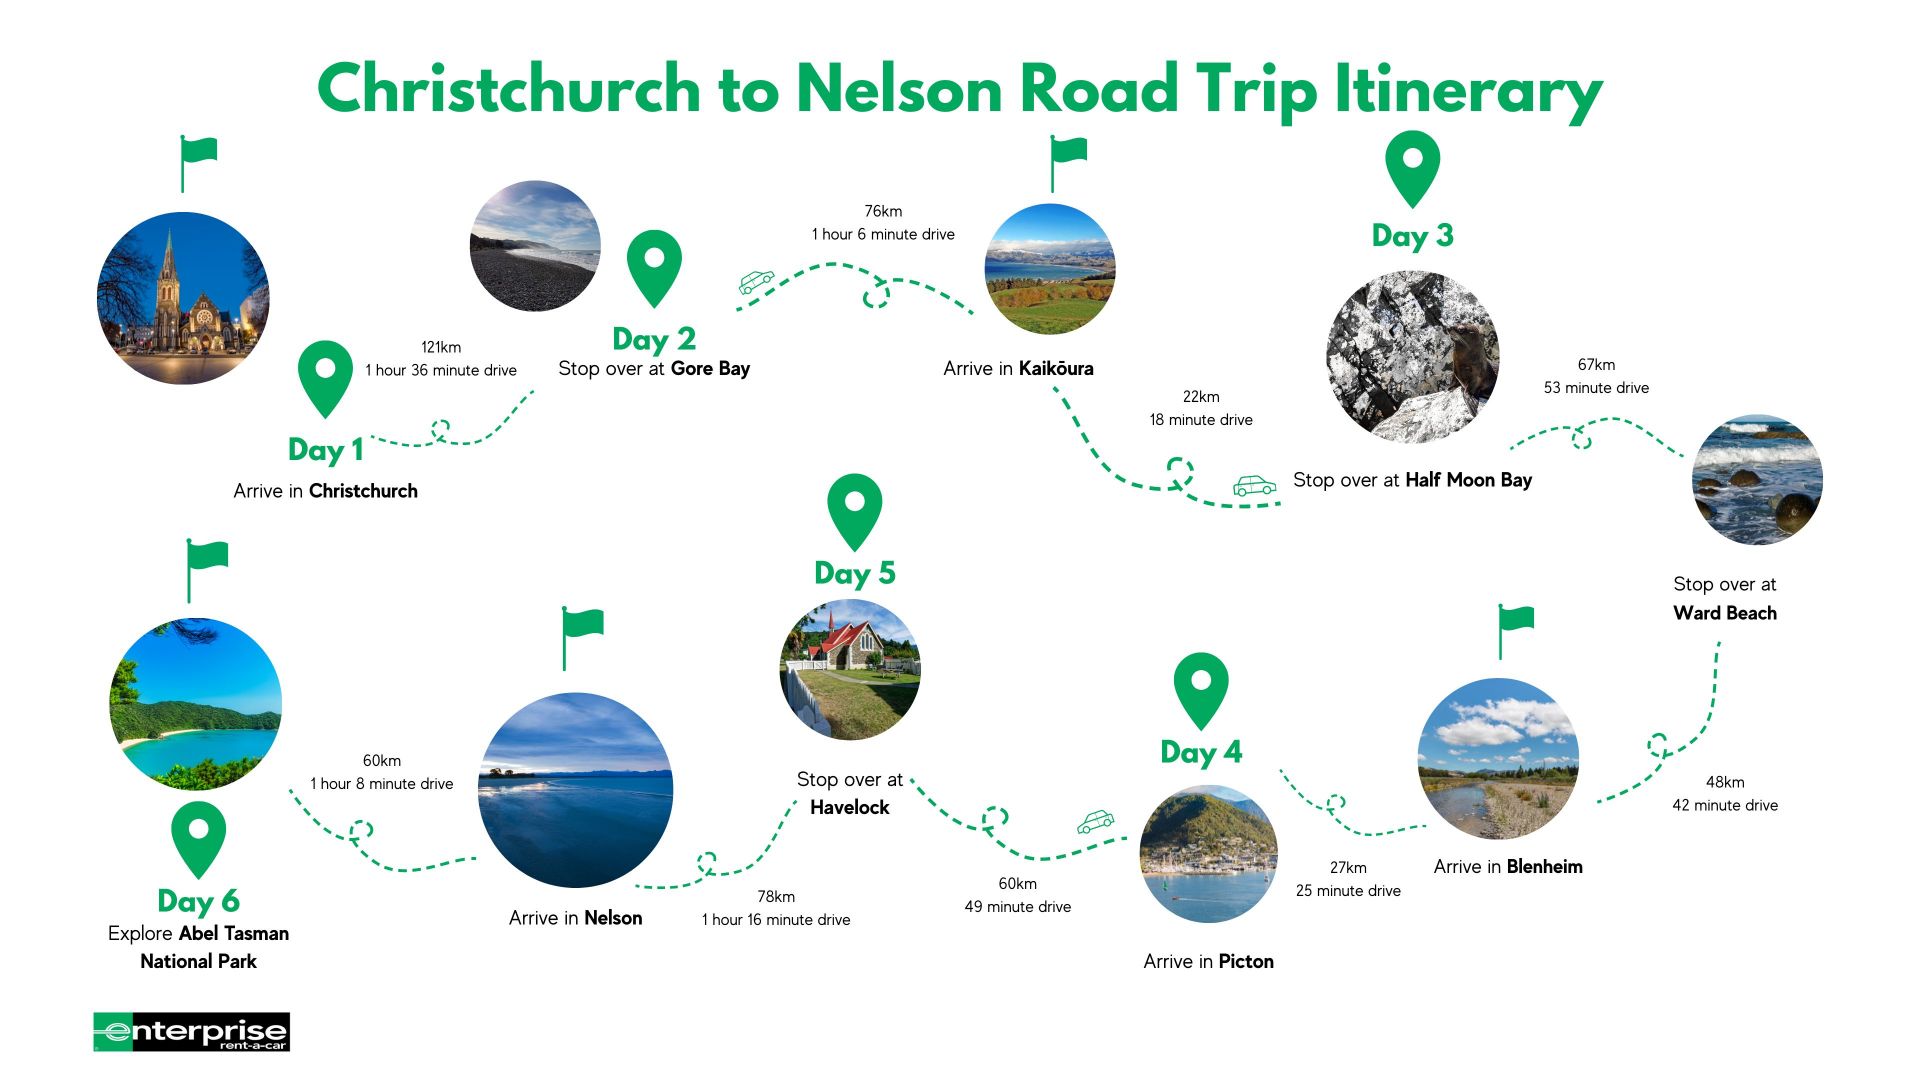 Christchurch to Nelson road trip itinerary